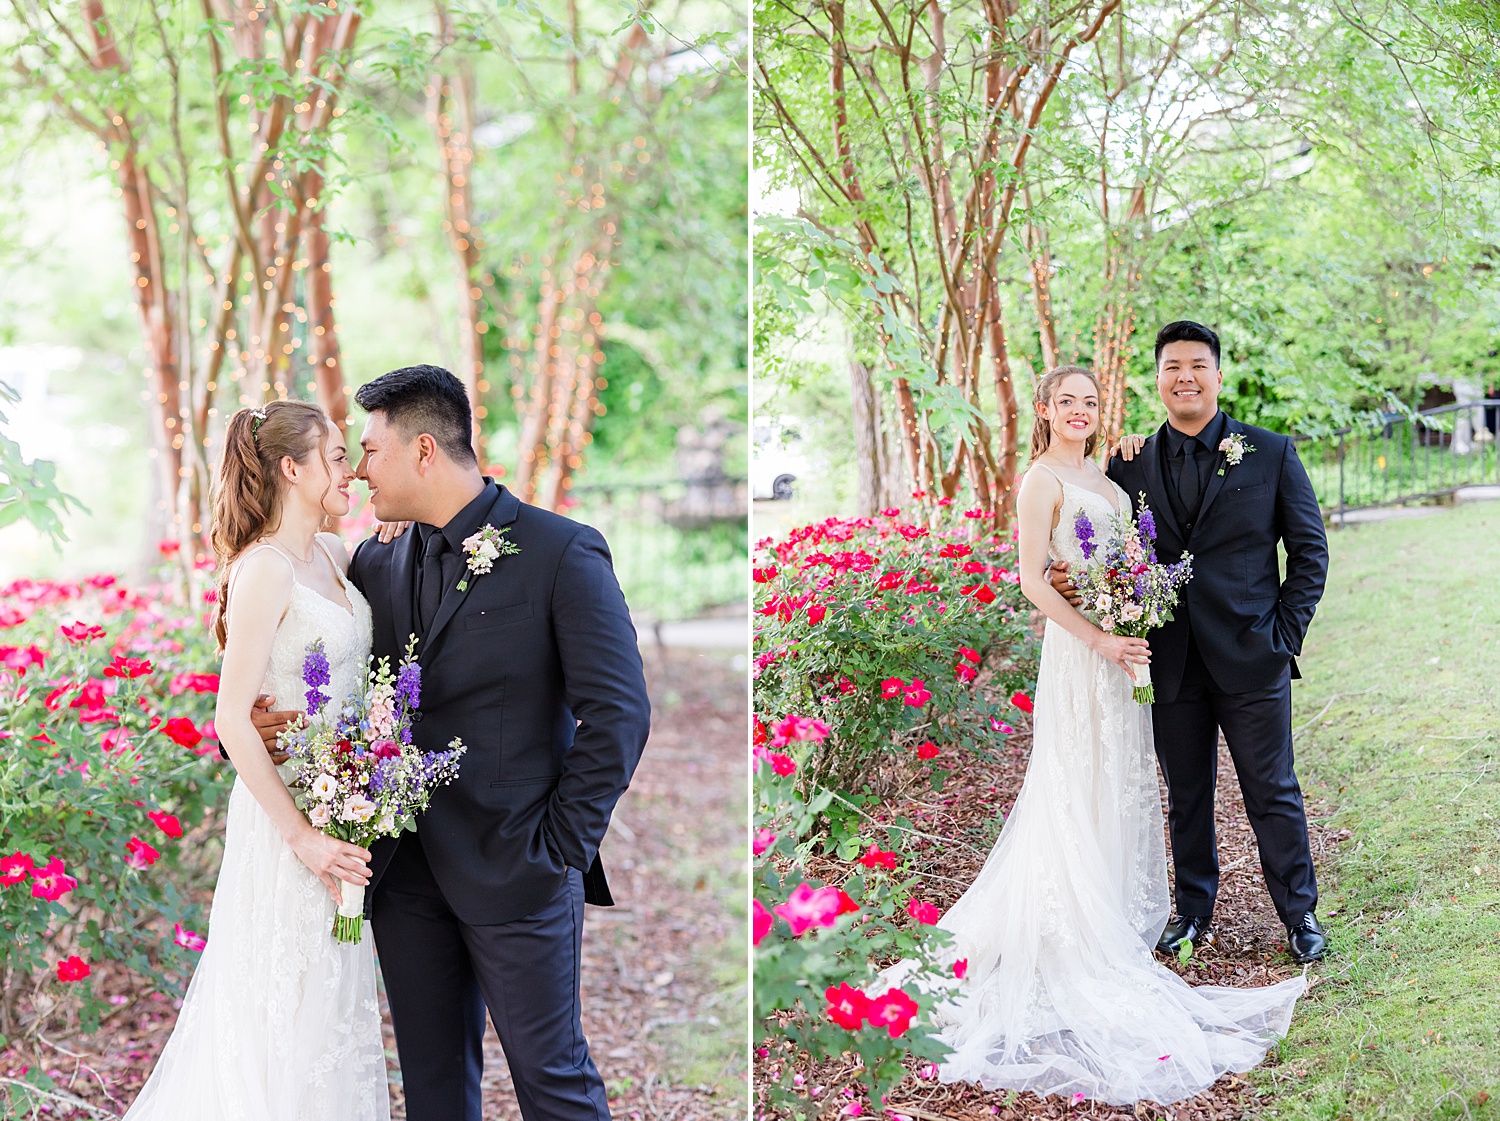 wedding portraits with beautiful blooming flowers and light covered trees